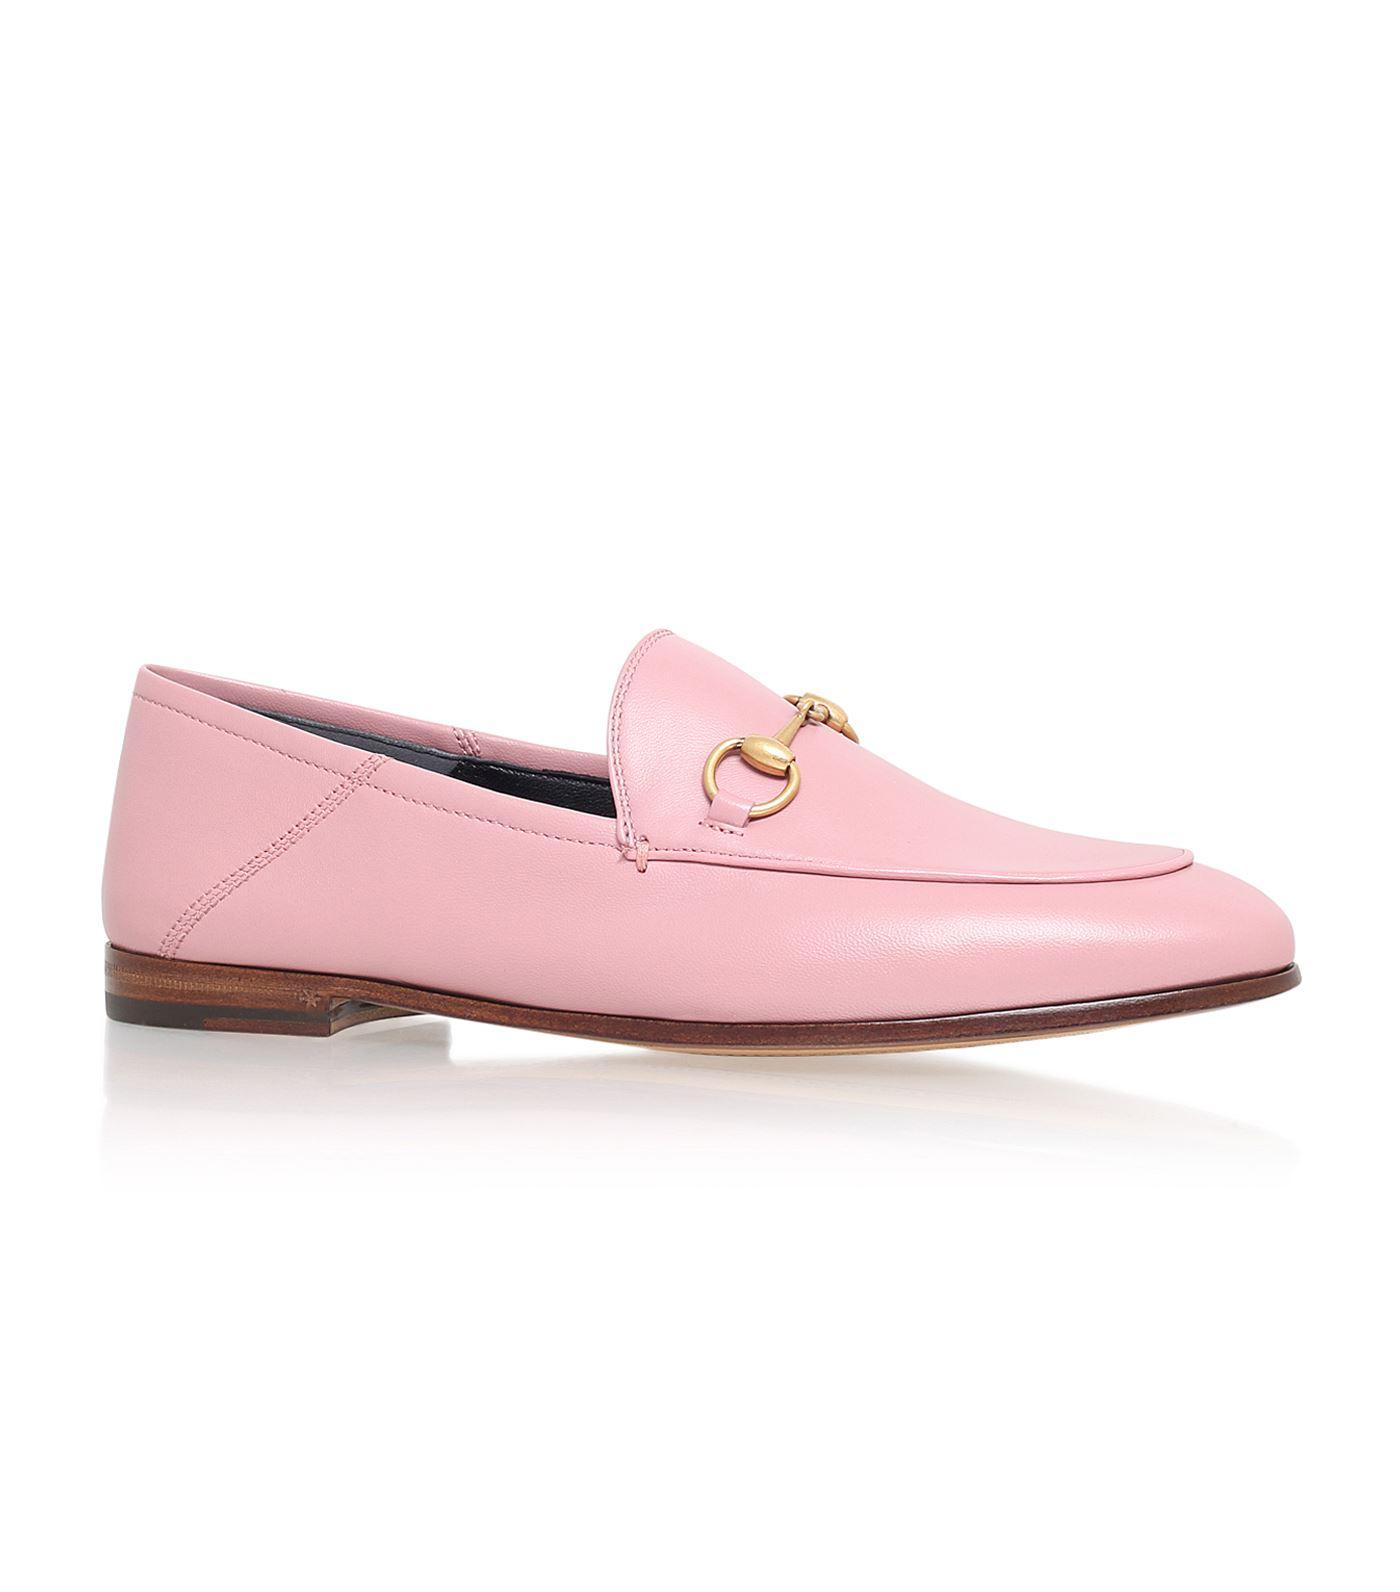 Gucci Leather Horsebit Loafers in Pink | Lyst